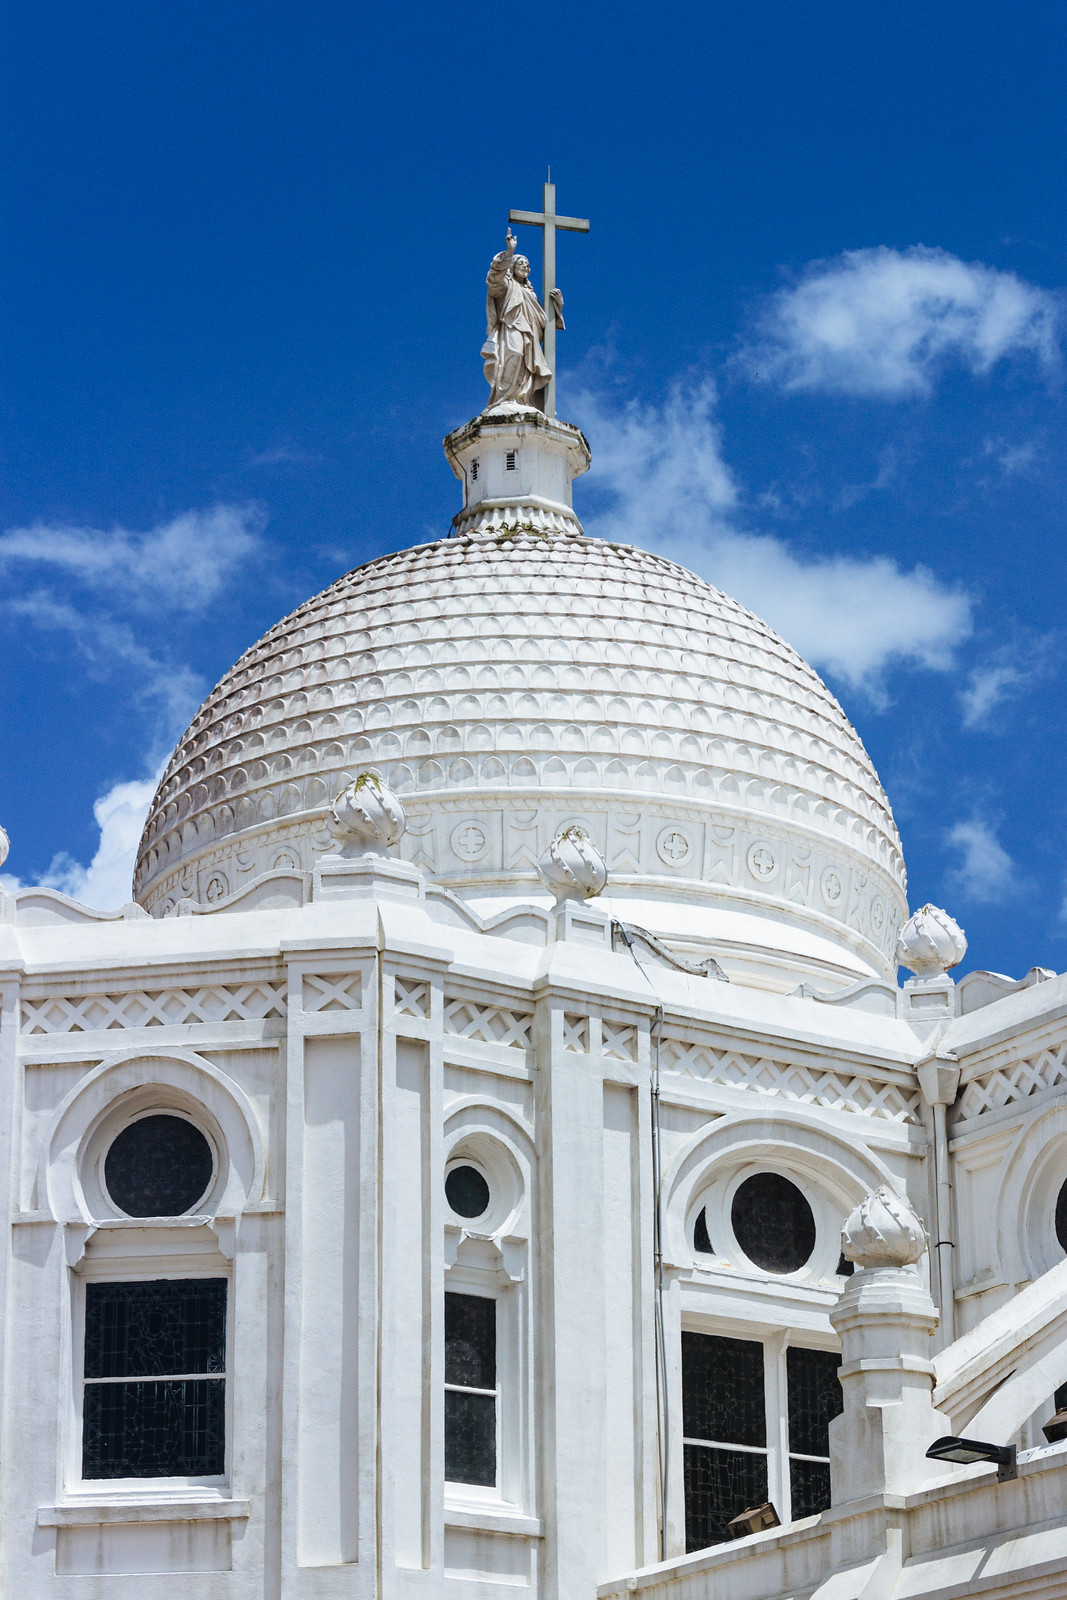 White church building with an onion-shaped dome against a blue sky